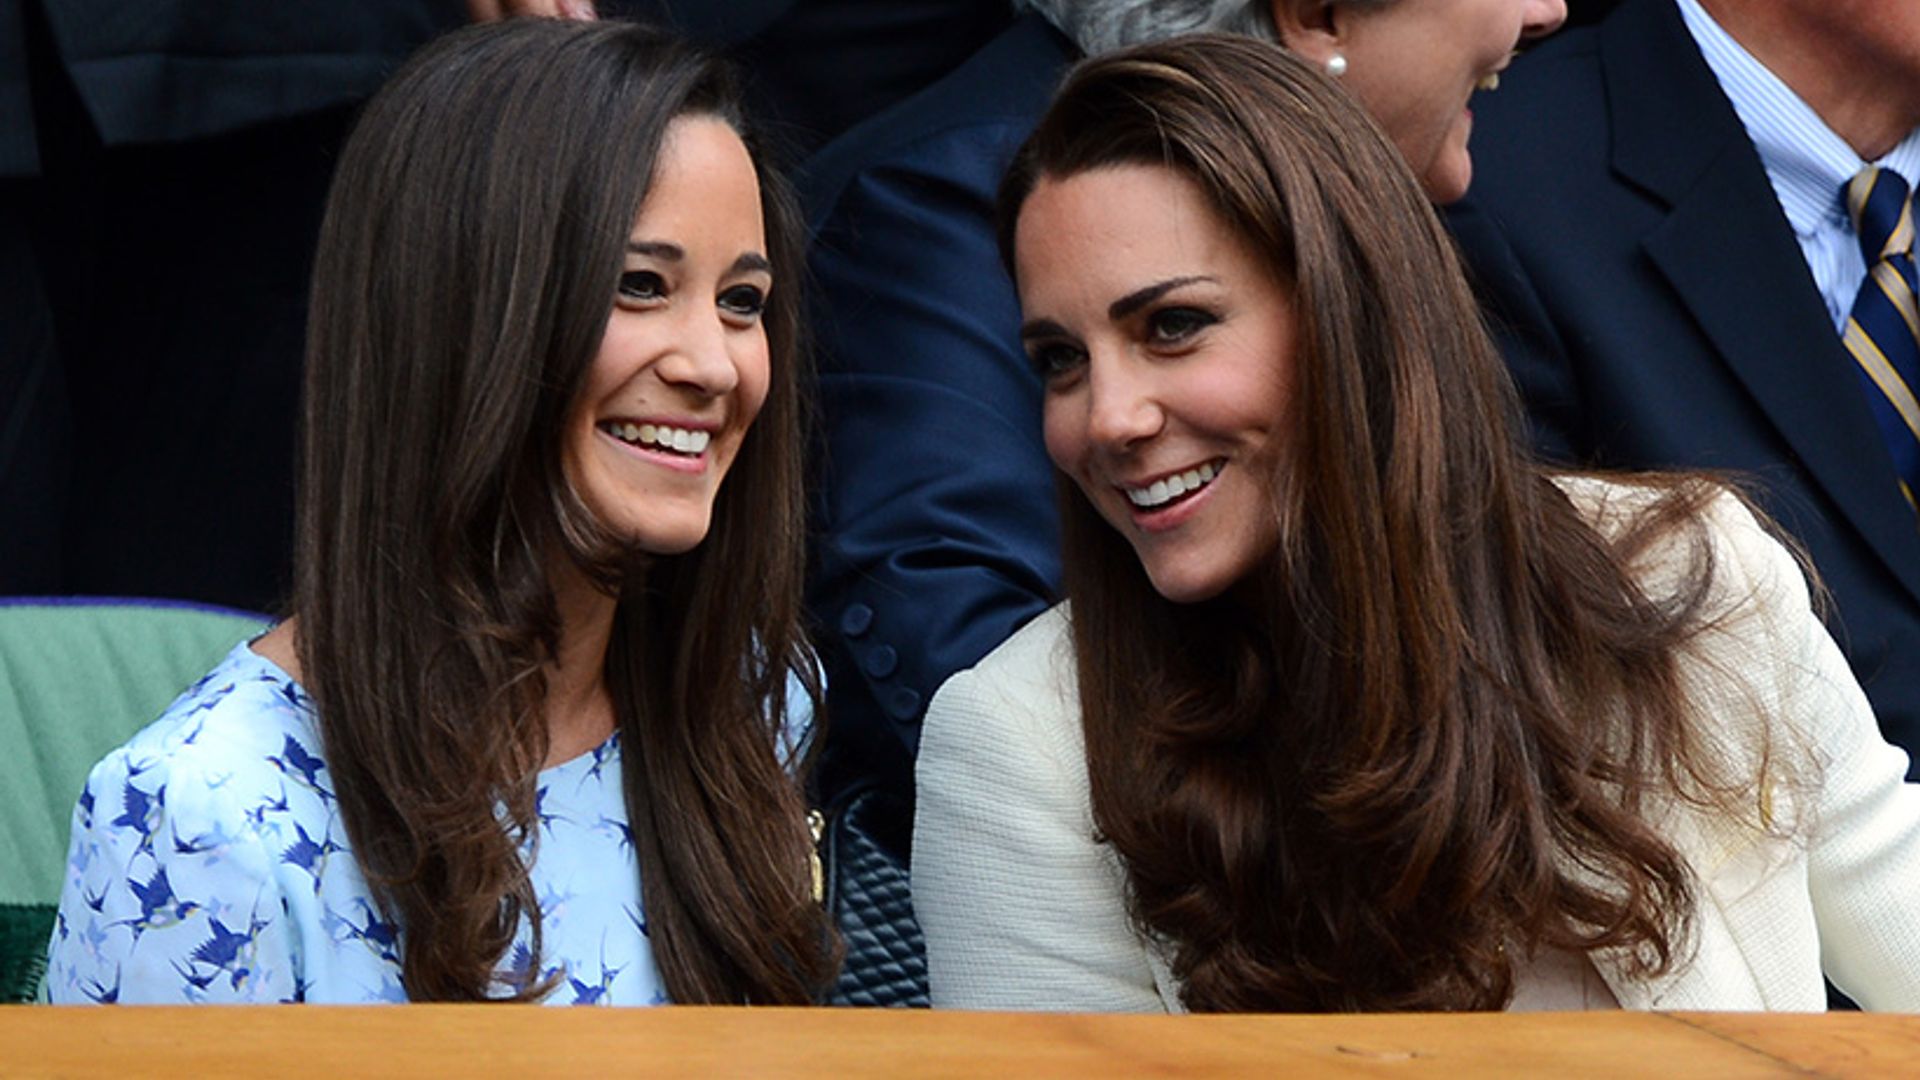 Kate and Pippa Middleton: How joint pregnancy strengthened their close bond